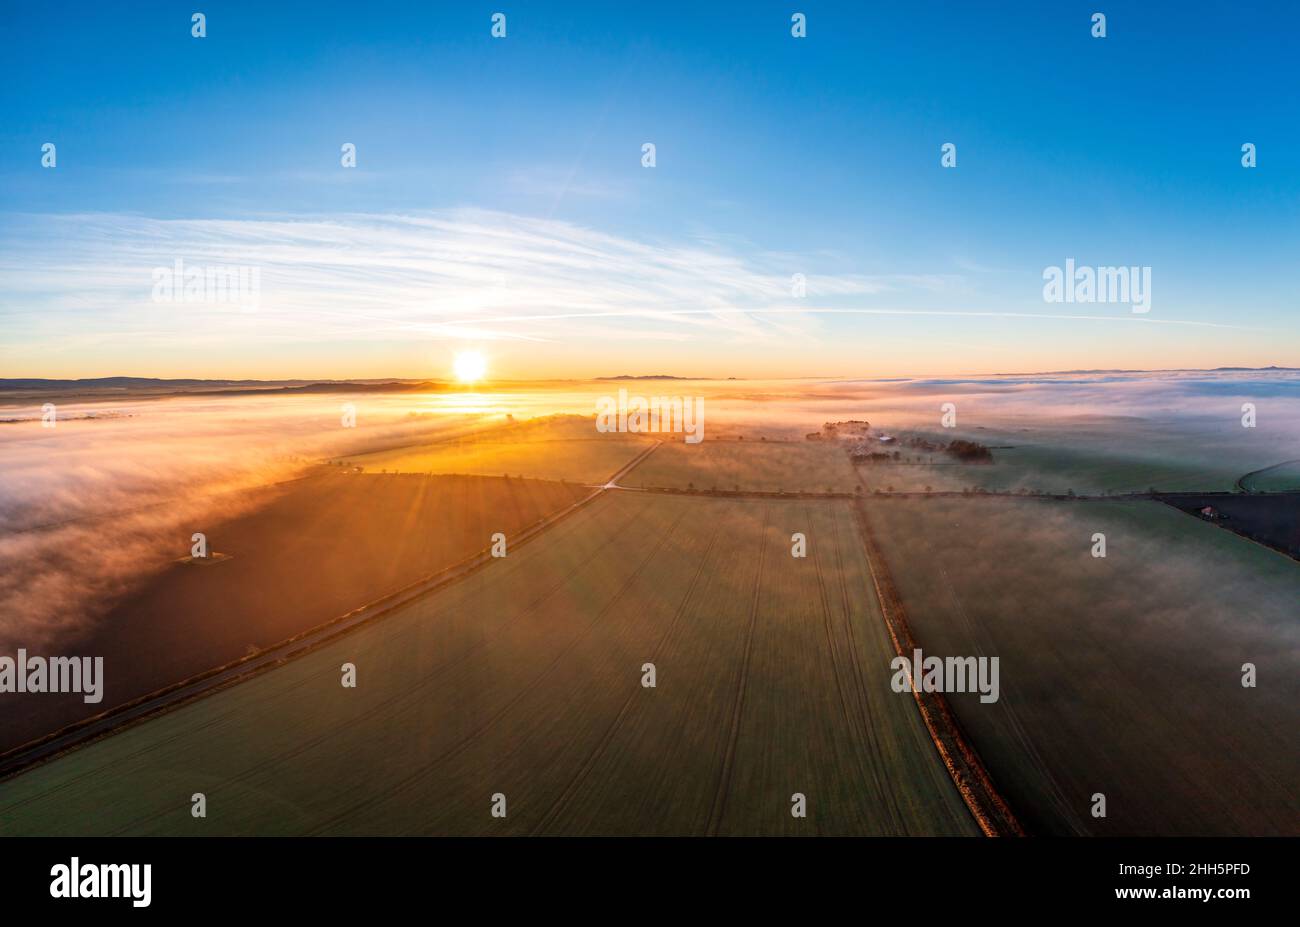 UK, Scotland, Kingston, Drone view of countryside fields at sunset Stock Photo